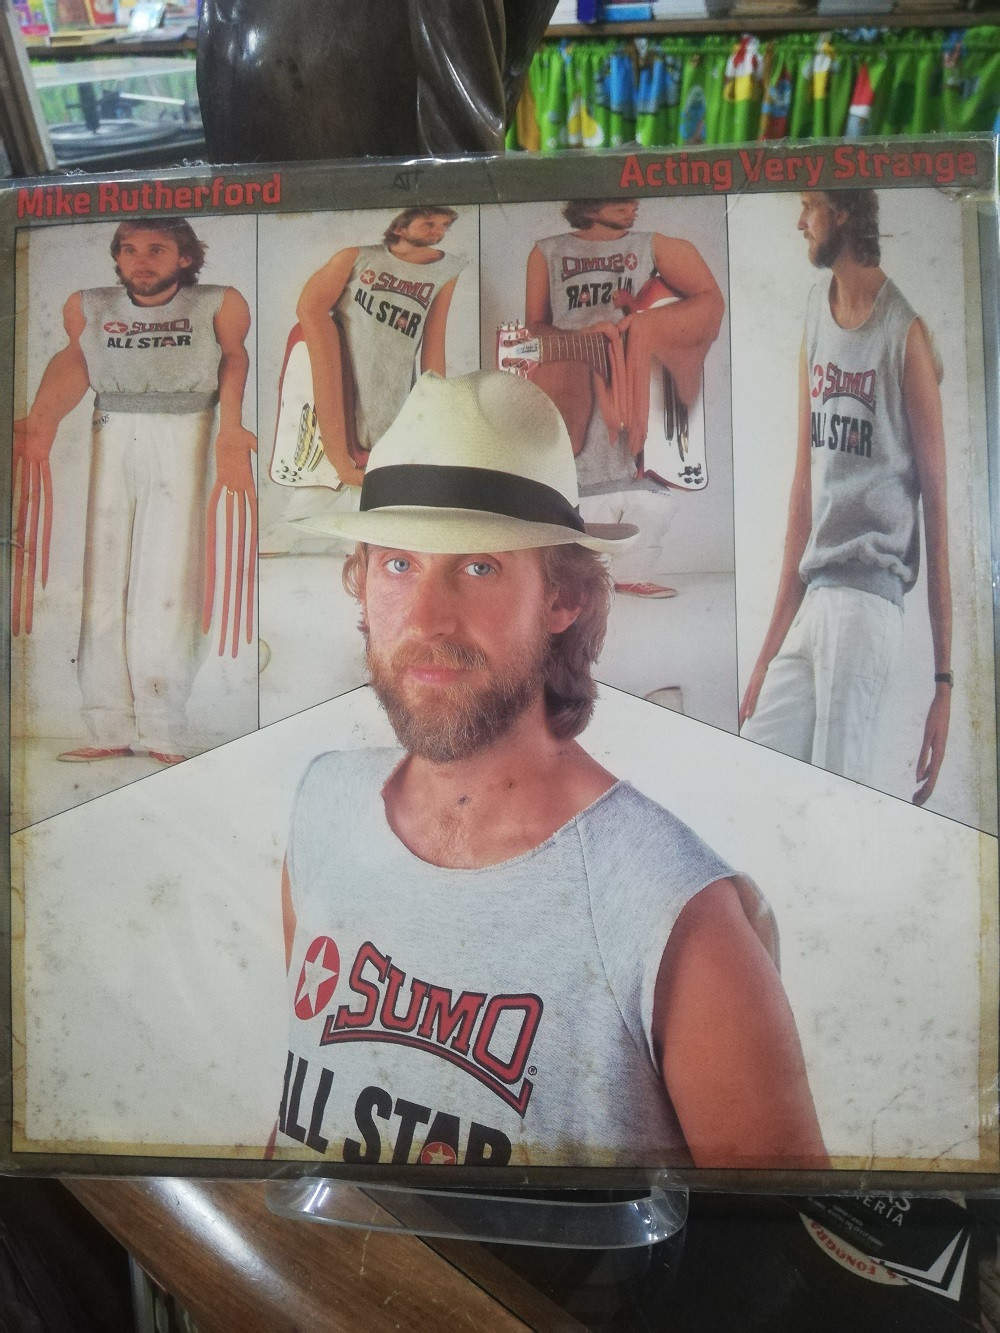 Imagen LP MIKE RUTHERFORD - ACTING VERY STRANGE